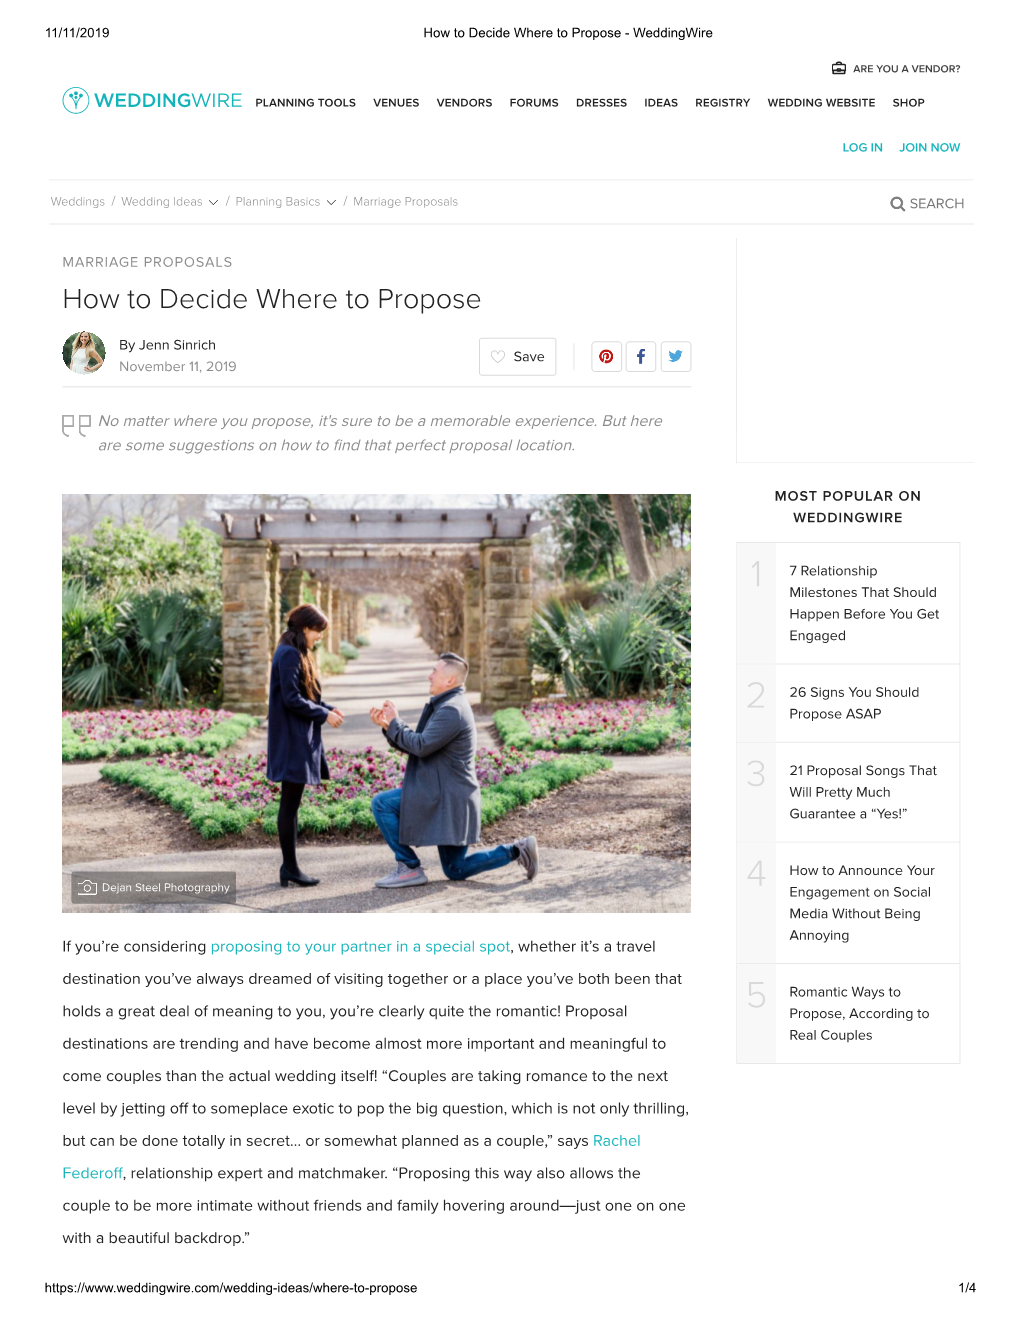 How to Decide Where to Propose - Weddingwire